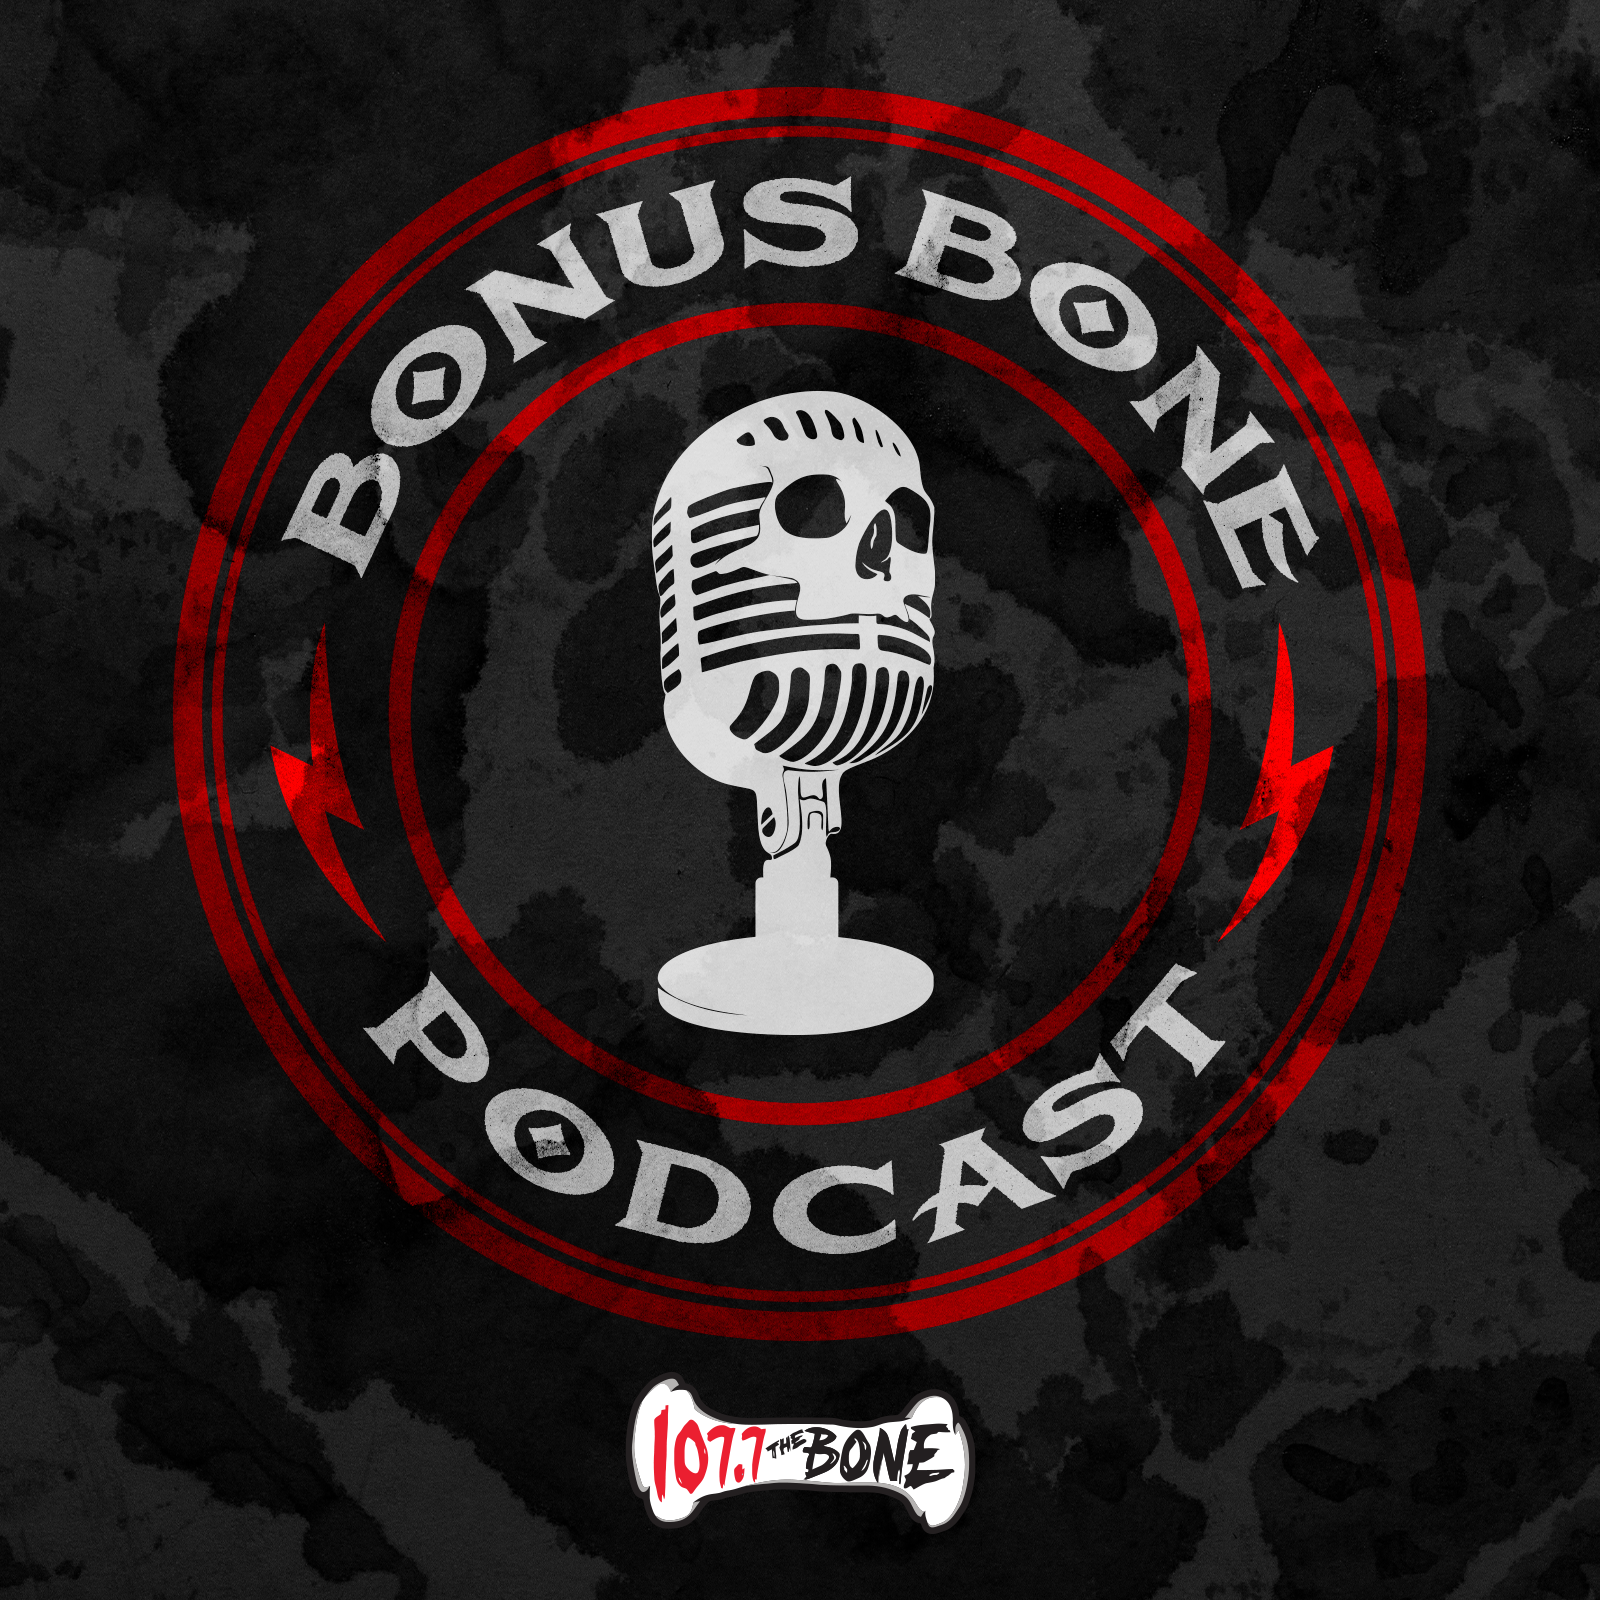 The Bonus Bone: Things In Your Life That You Like But Embarrassed To Admit